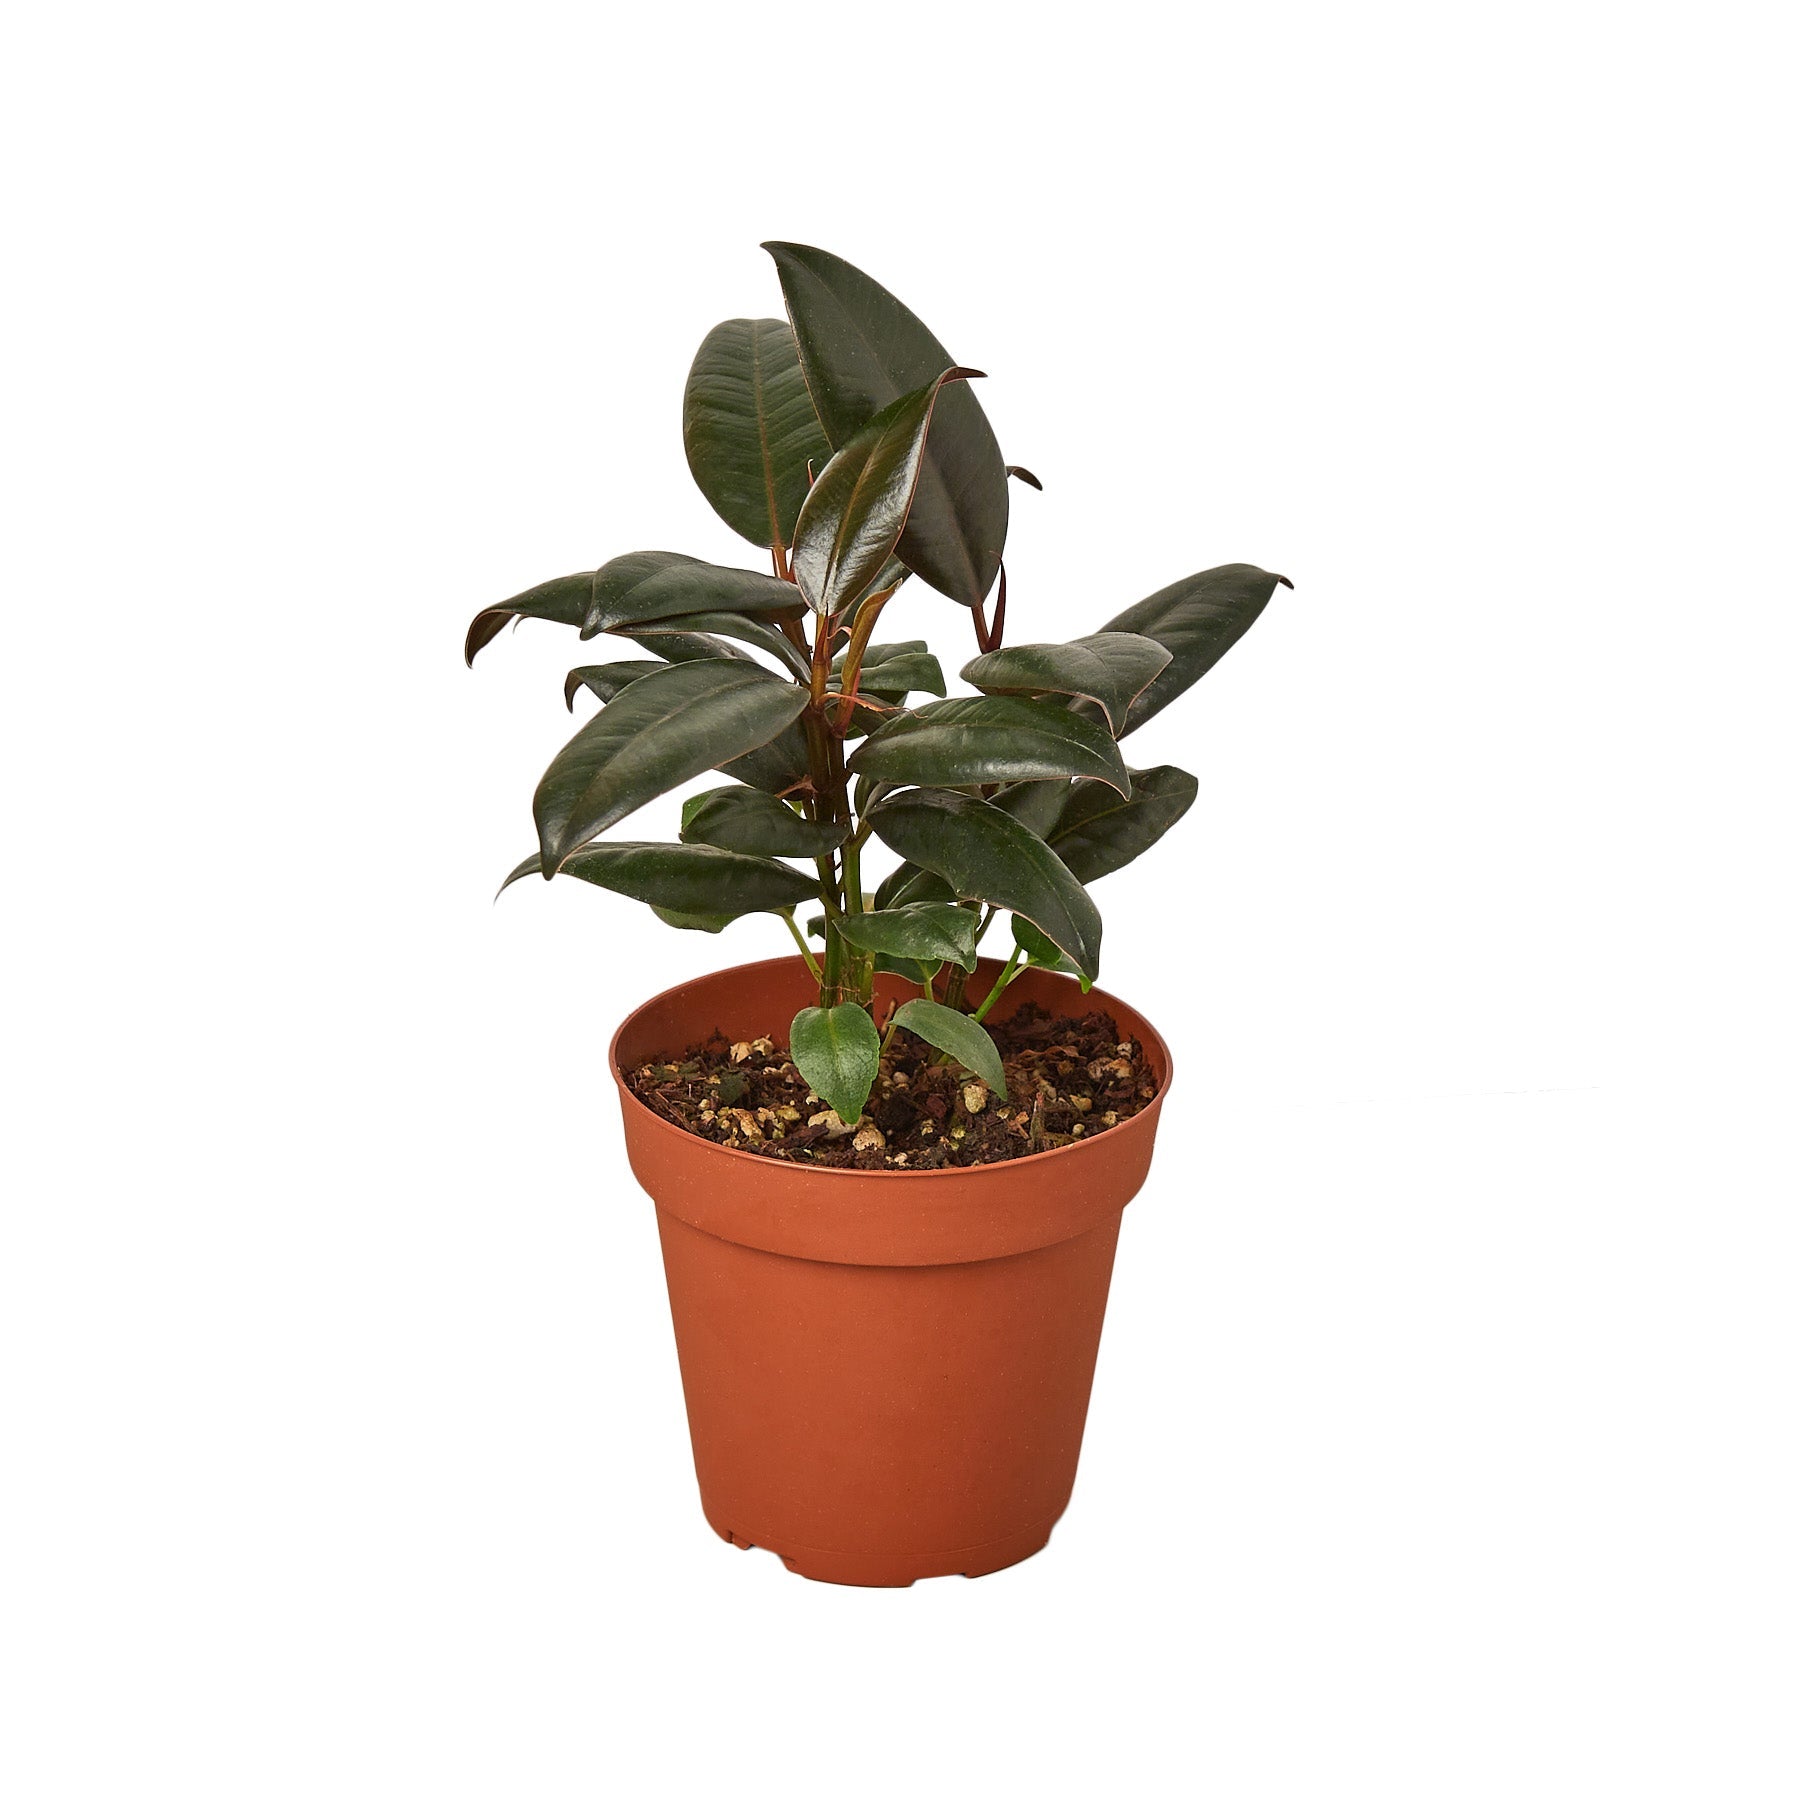 A small plant in a pot on a white background, available at a nursery near me.